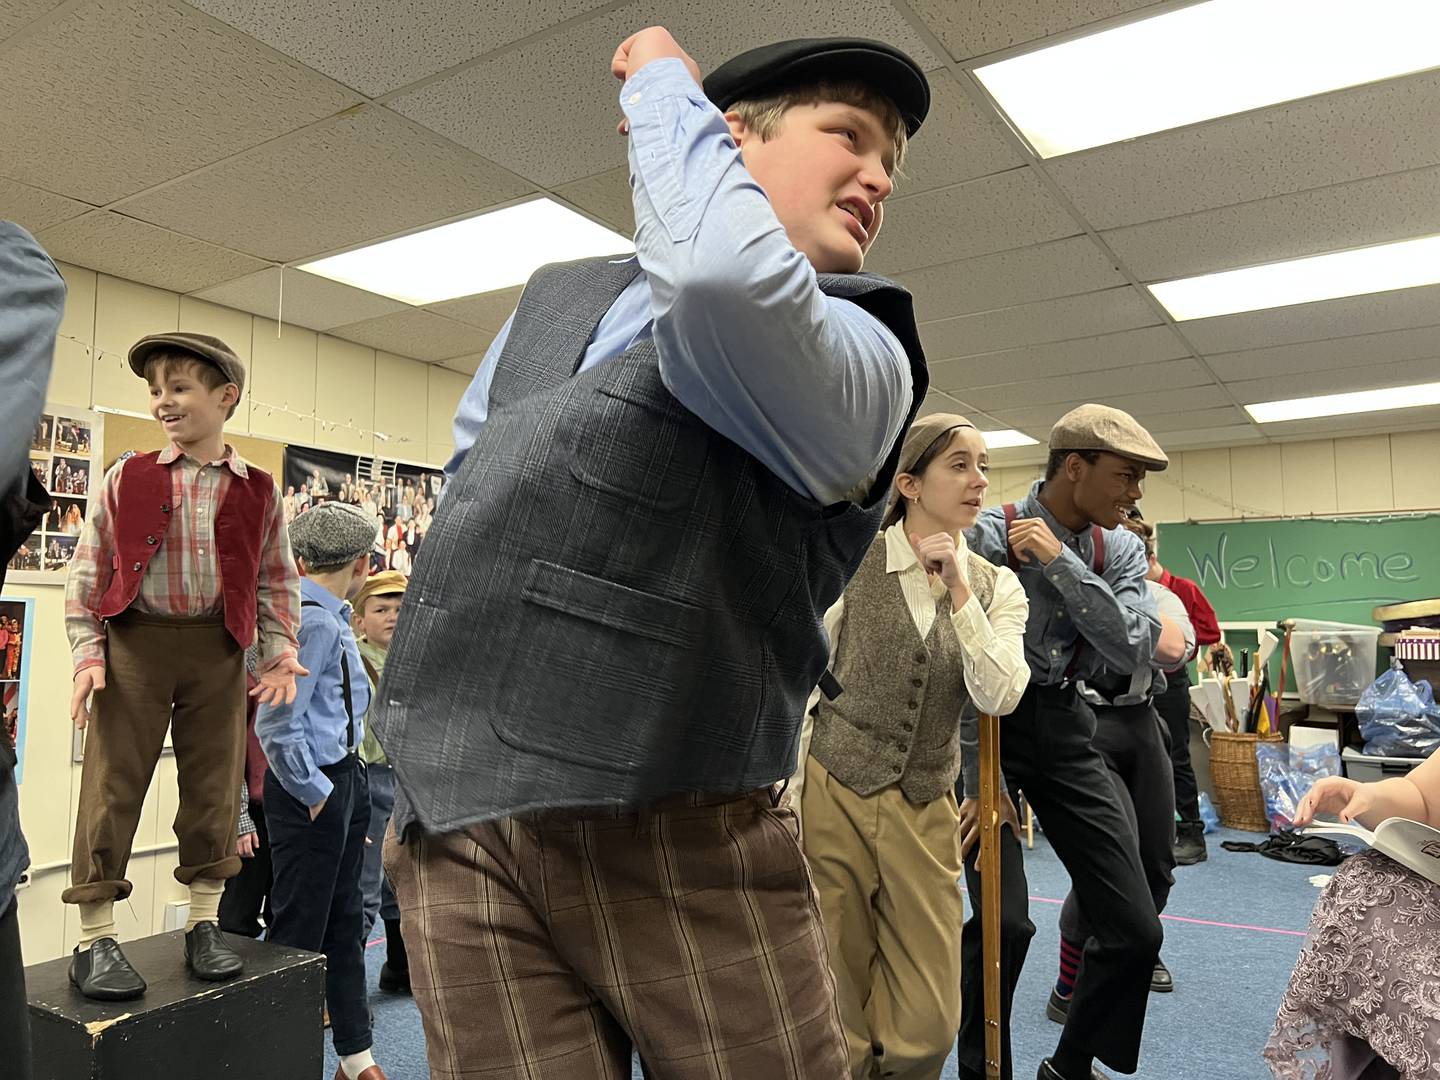 Jackson Heilemeier, 16, of Sandwich practices a musical number during a Jan. 26, 2023 rehearsal of the Children's Community Theatre's production of the Disney Broadway musical, Newsies.